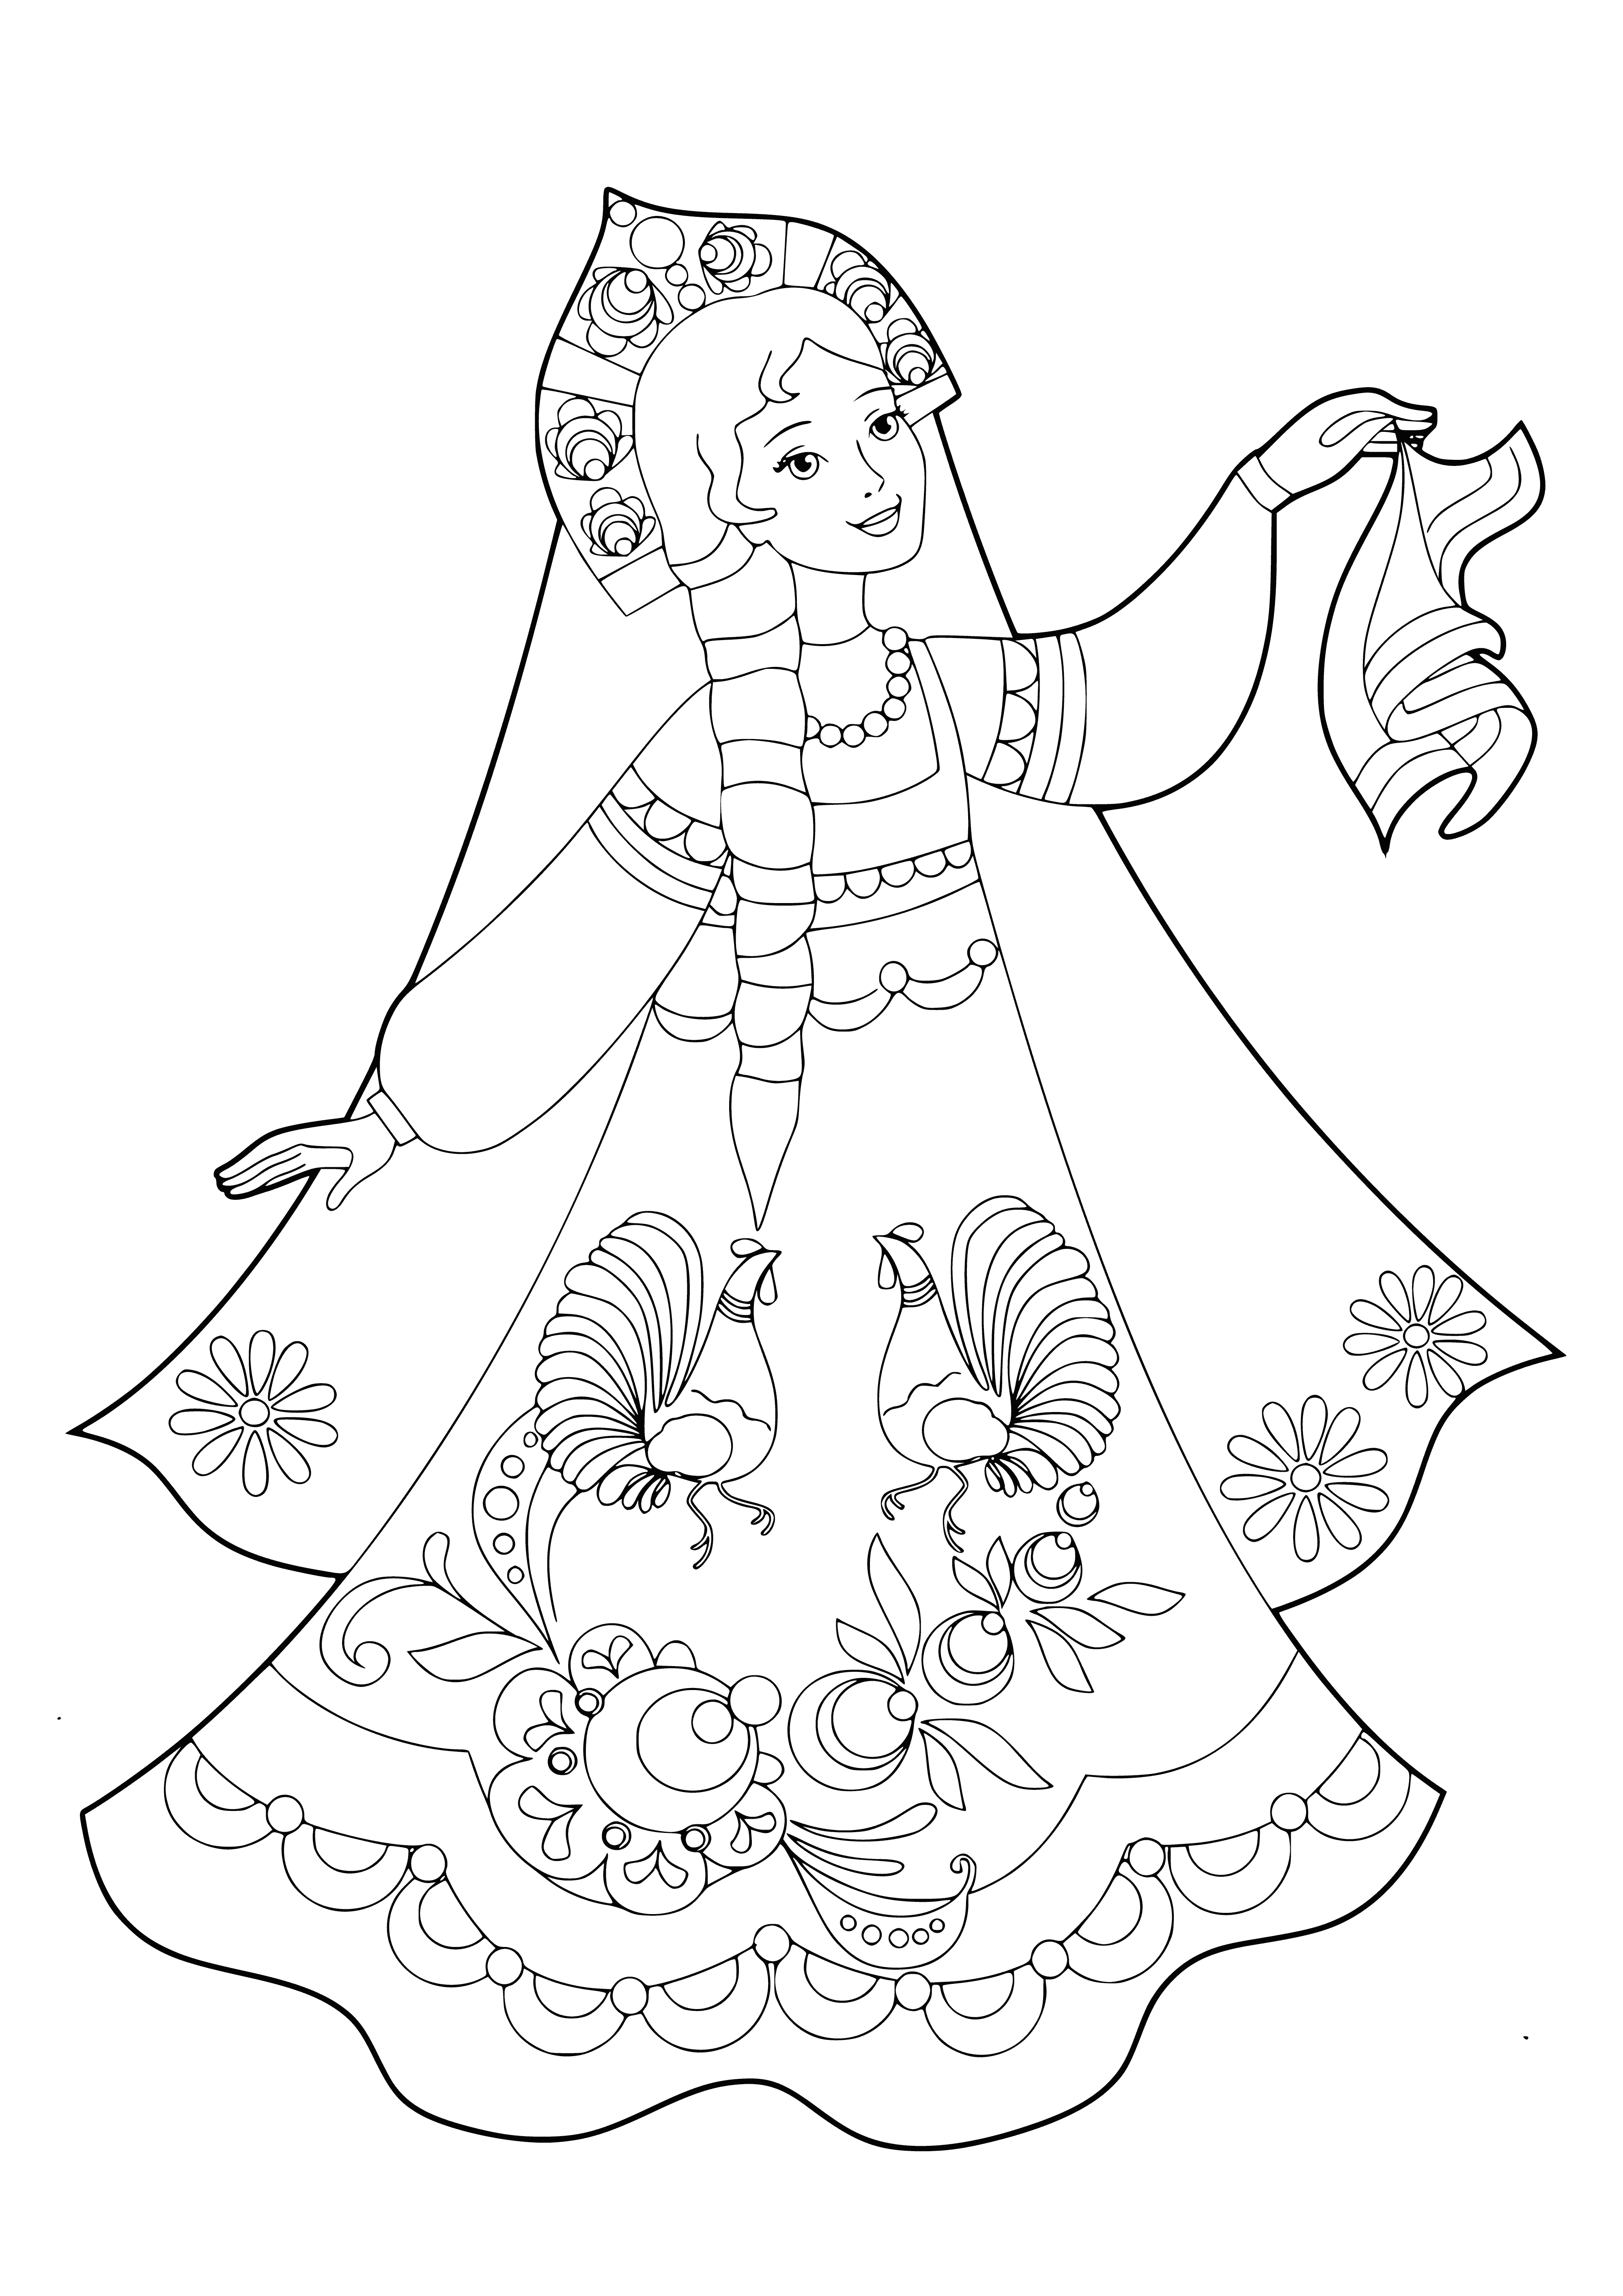 coloring page: Russian beauty is unparalleled; stunning looks, perfect physique, intelligence & wit make them a highly desirable people.